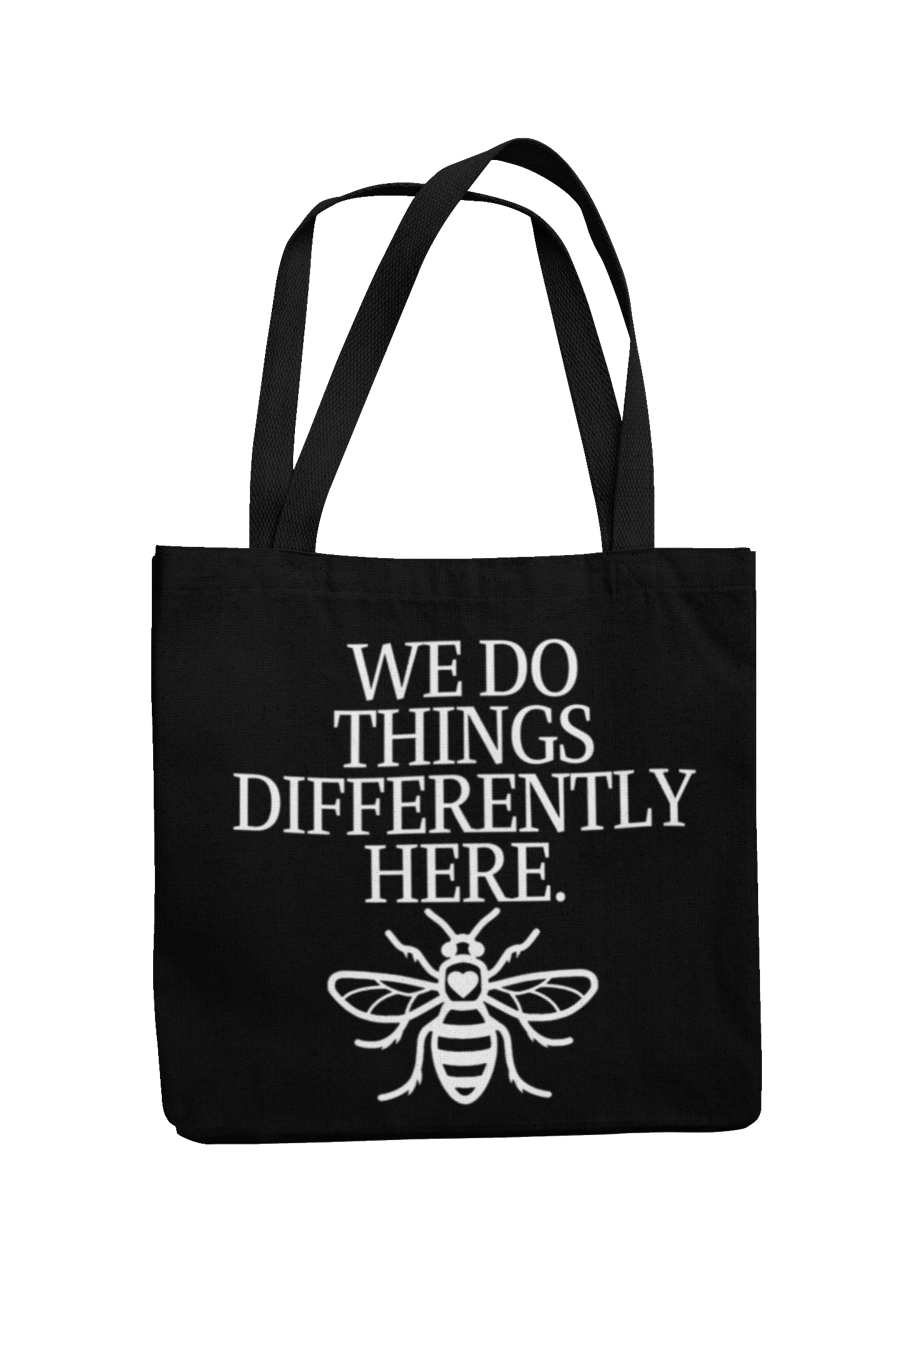 Manchester Bee Tote Bag -We Do Things Differently Here